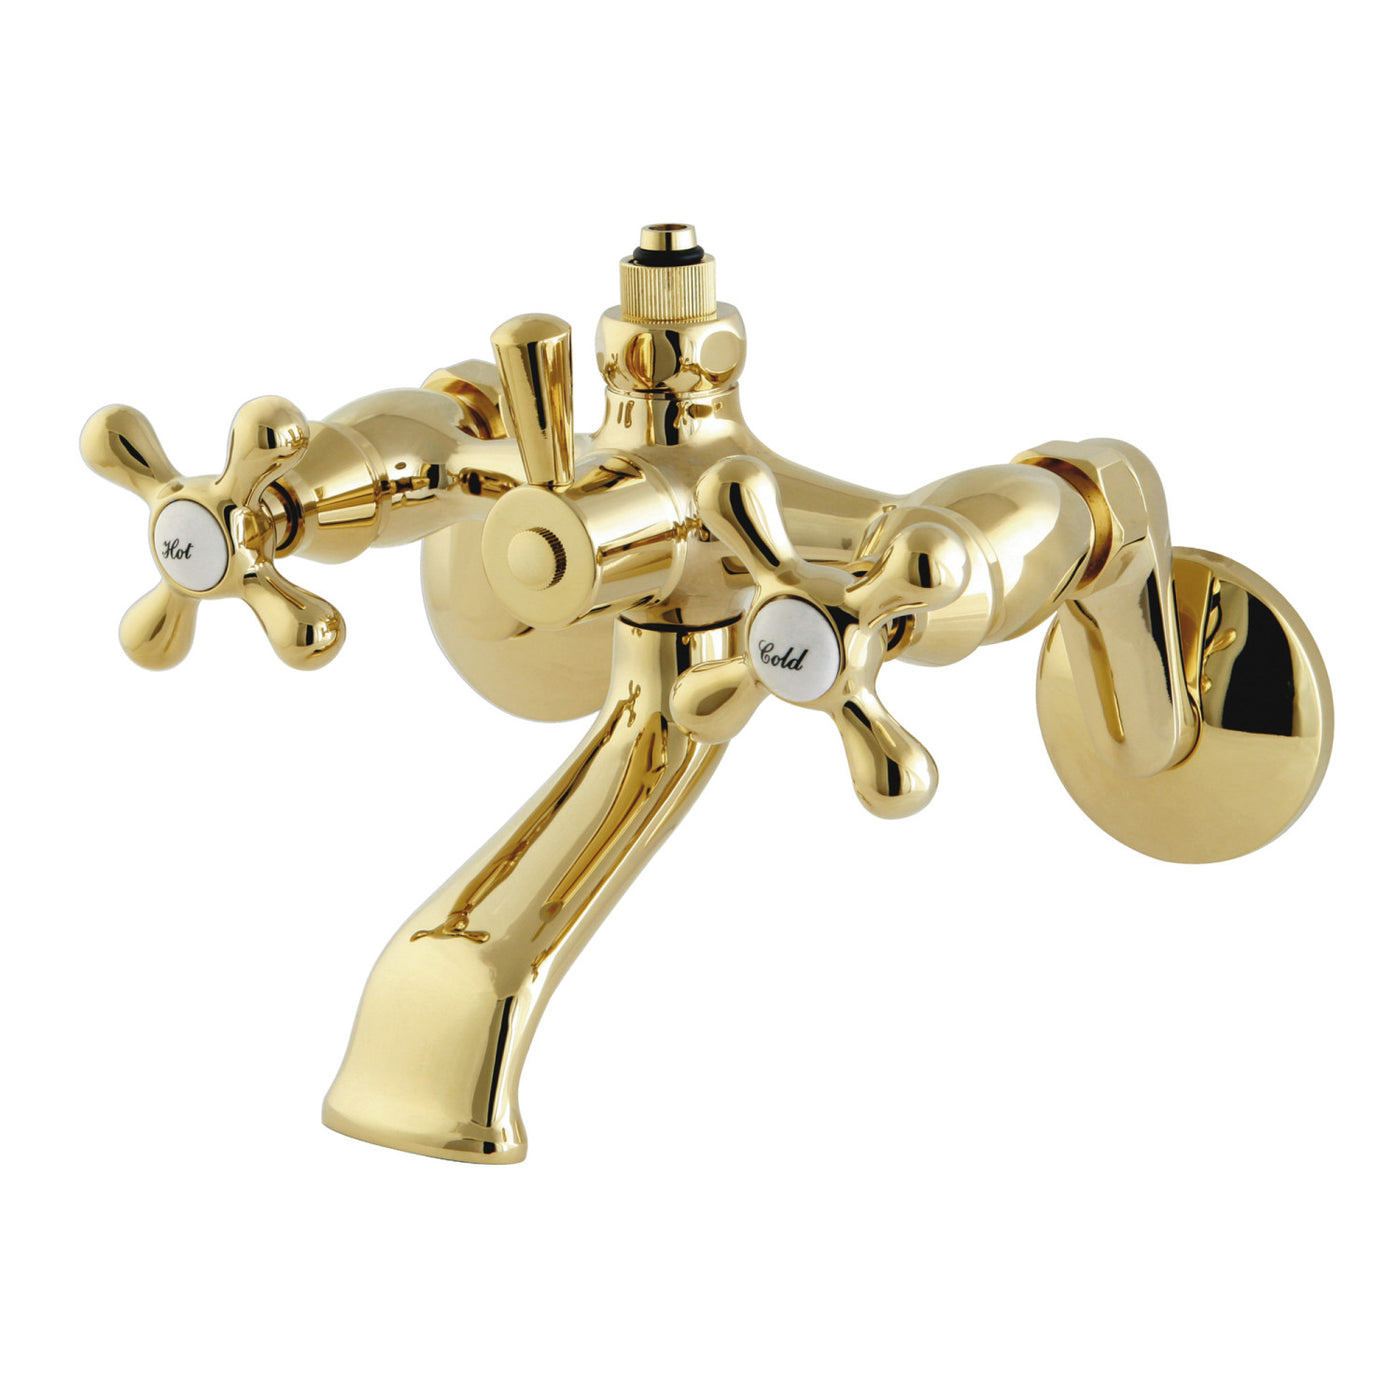 Elements of Design ED2662 Wall Mount Tub Faucet with Riser Adaptor, Polished Brass